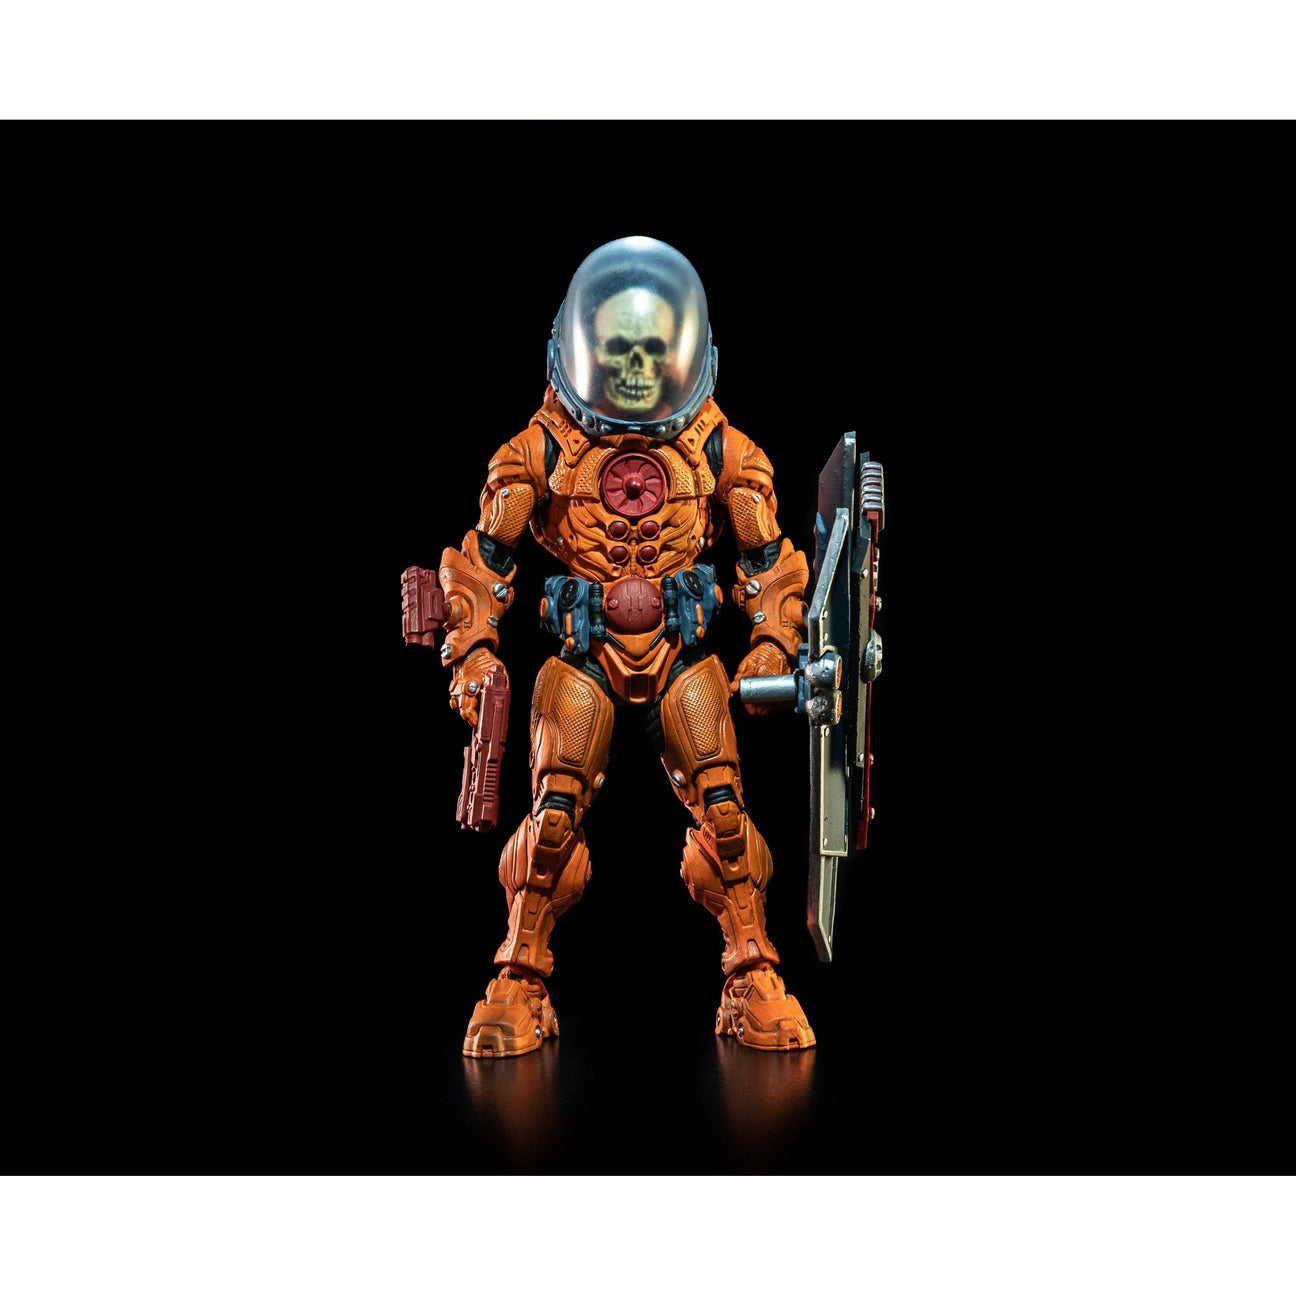 Mythic/ Cosmic Legions: Wal-torr the Mad 2-Pack (Legions Con Exclusive)-Actionfiguren-Four Horsemen Toy Design-Mighty Underground